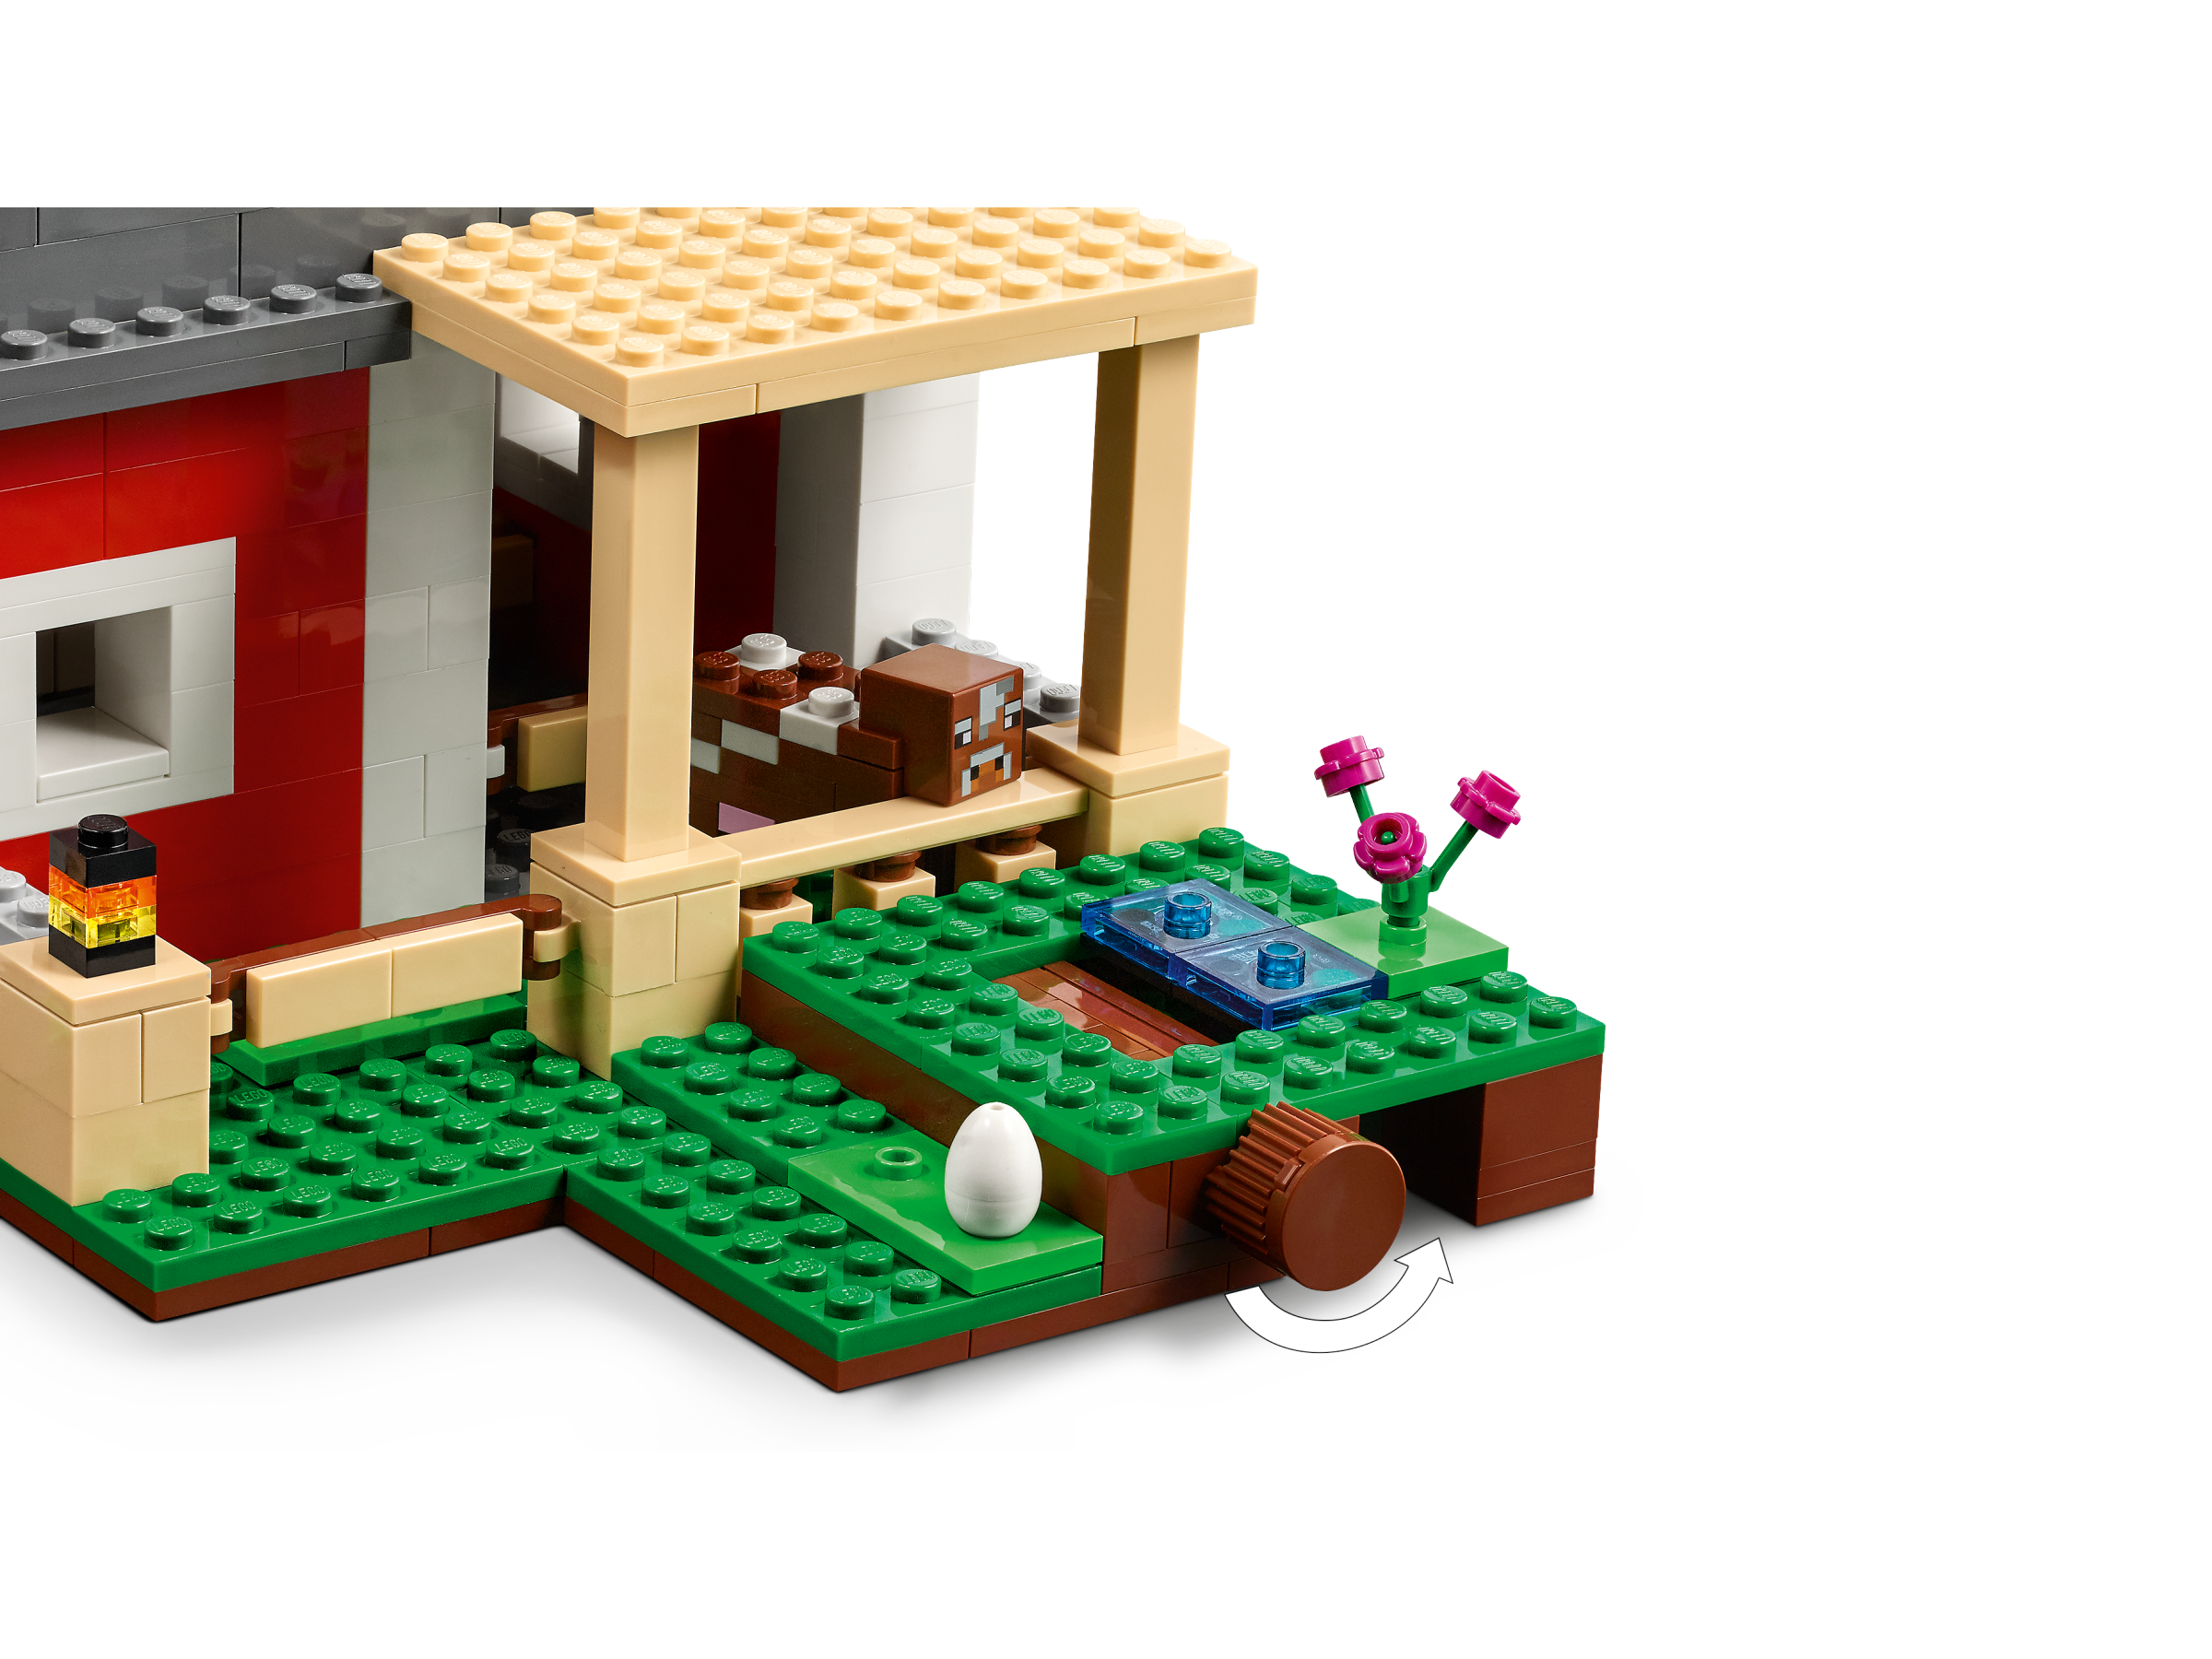 The Red Barn 21187 | Minecraft® | Buy online at the Official LEGO 